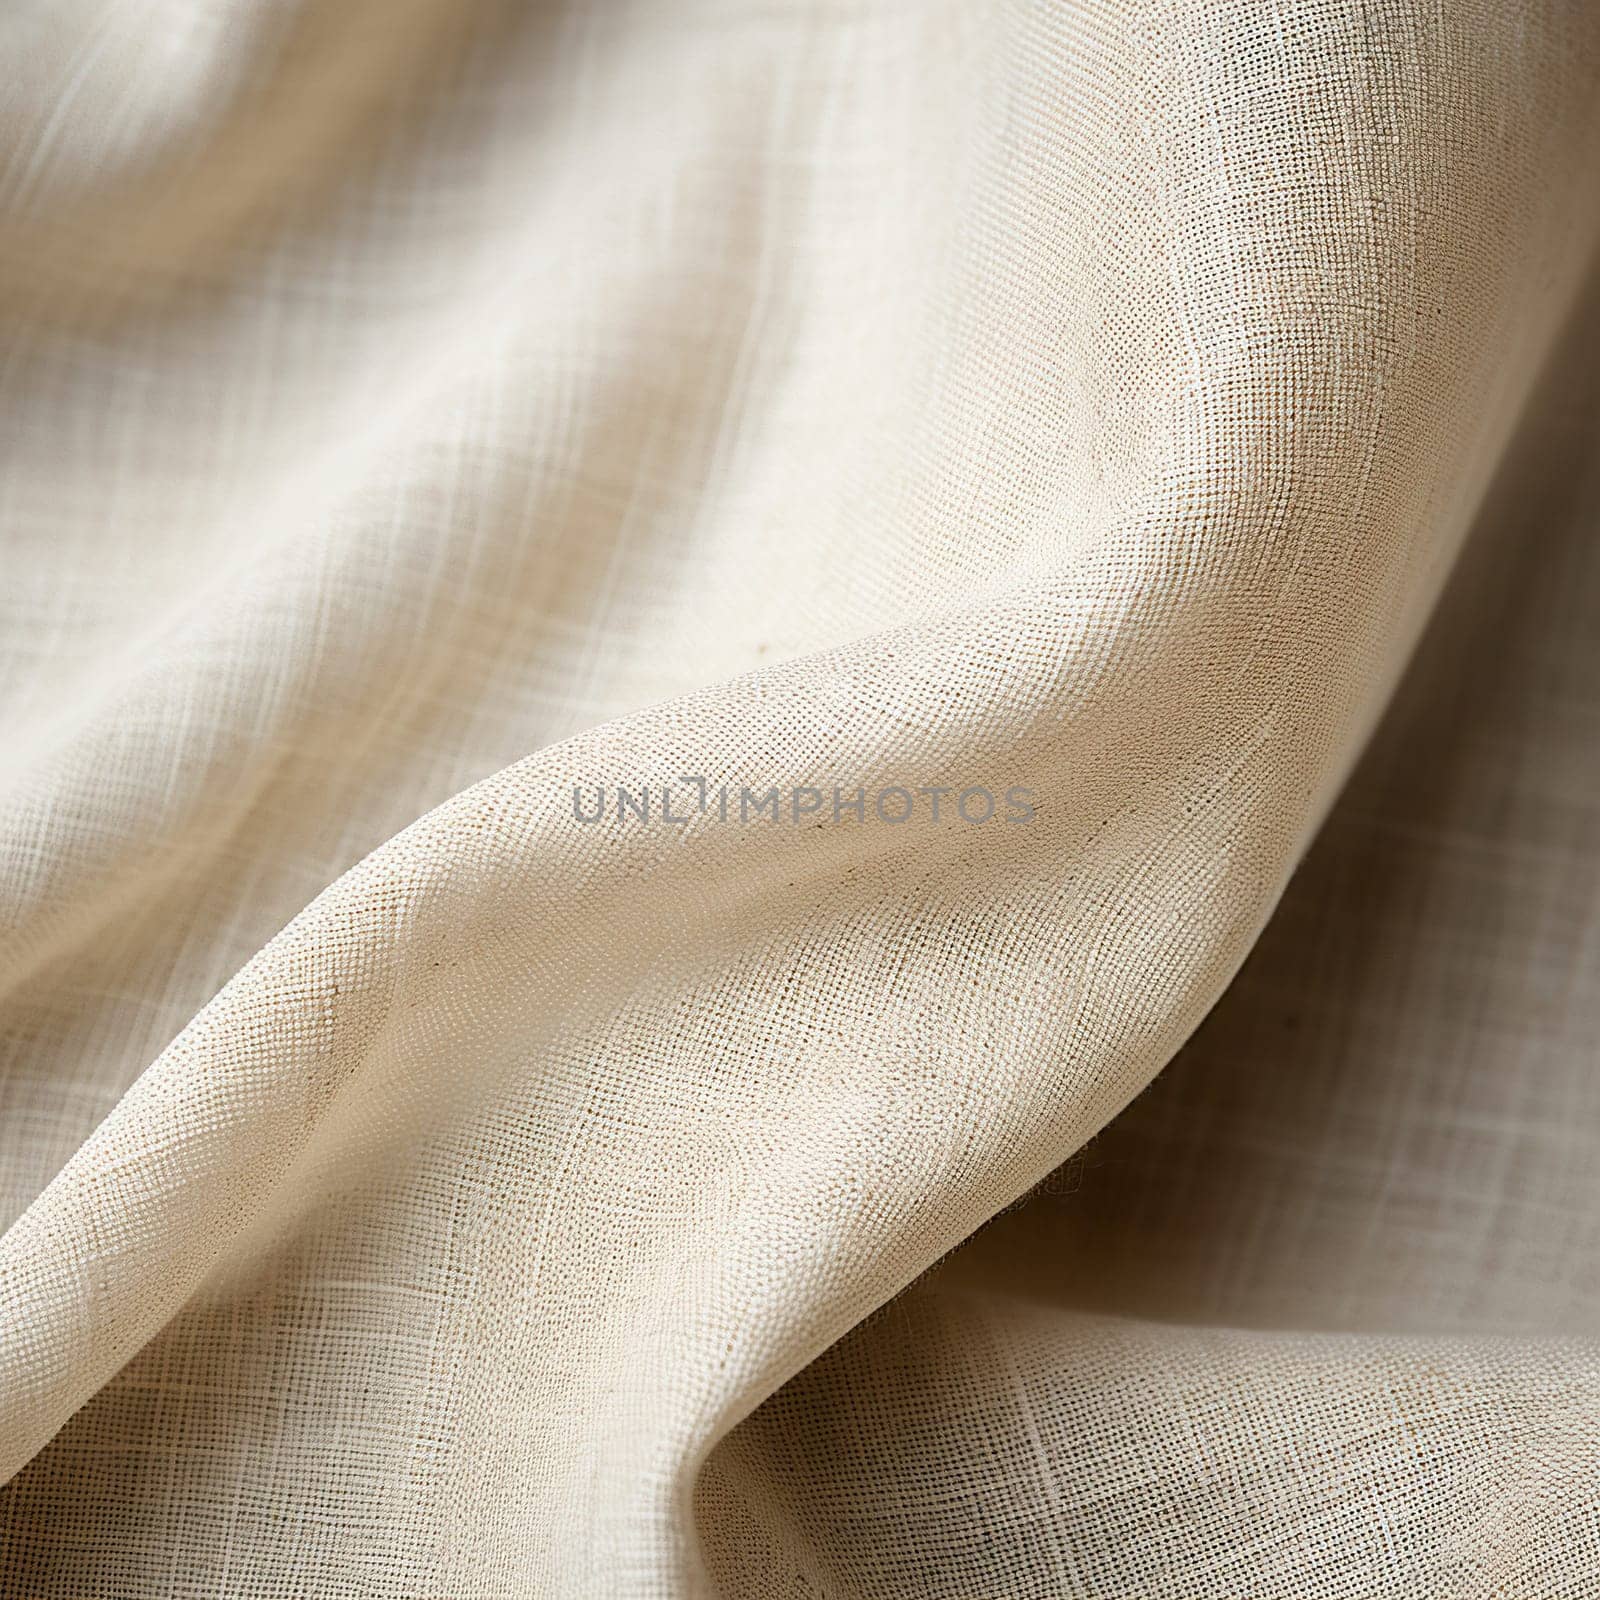 Linen texture. Background made of linen fabric with folds.